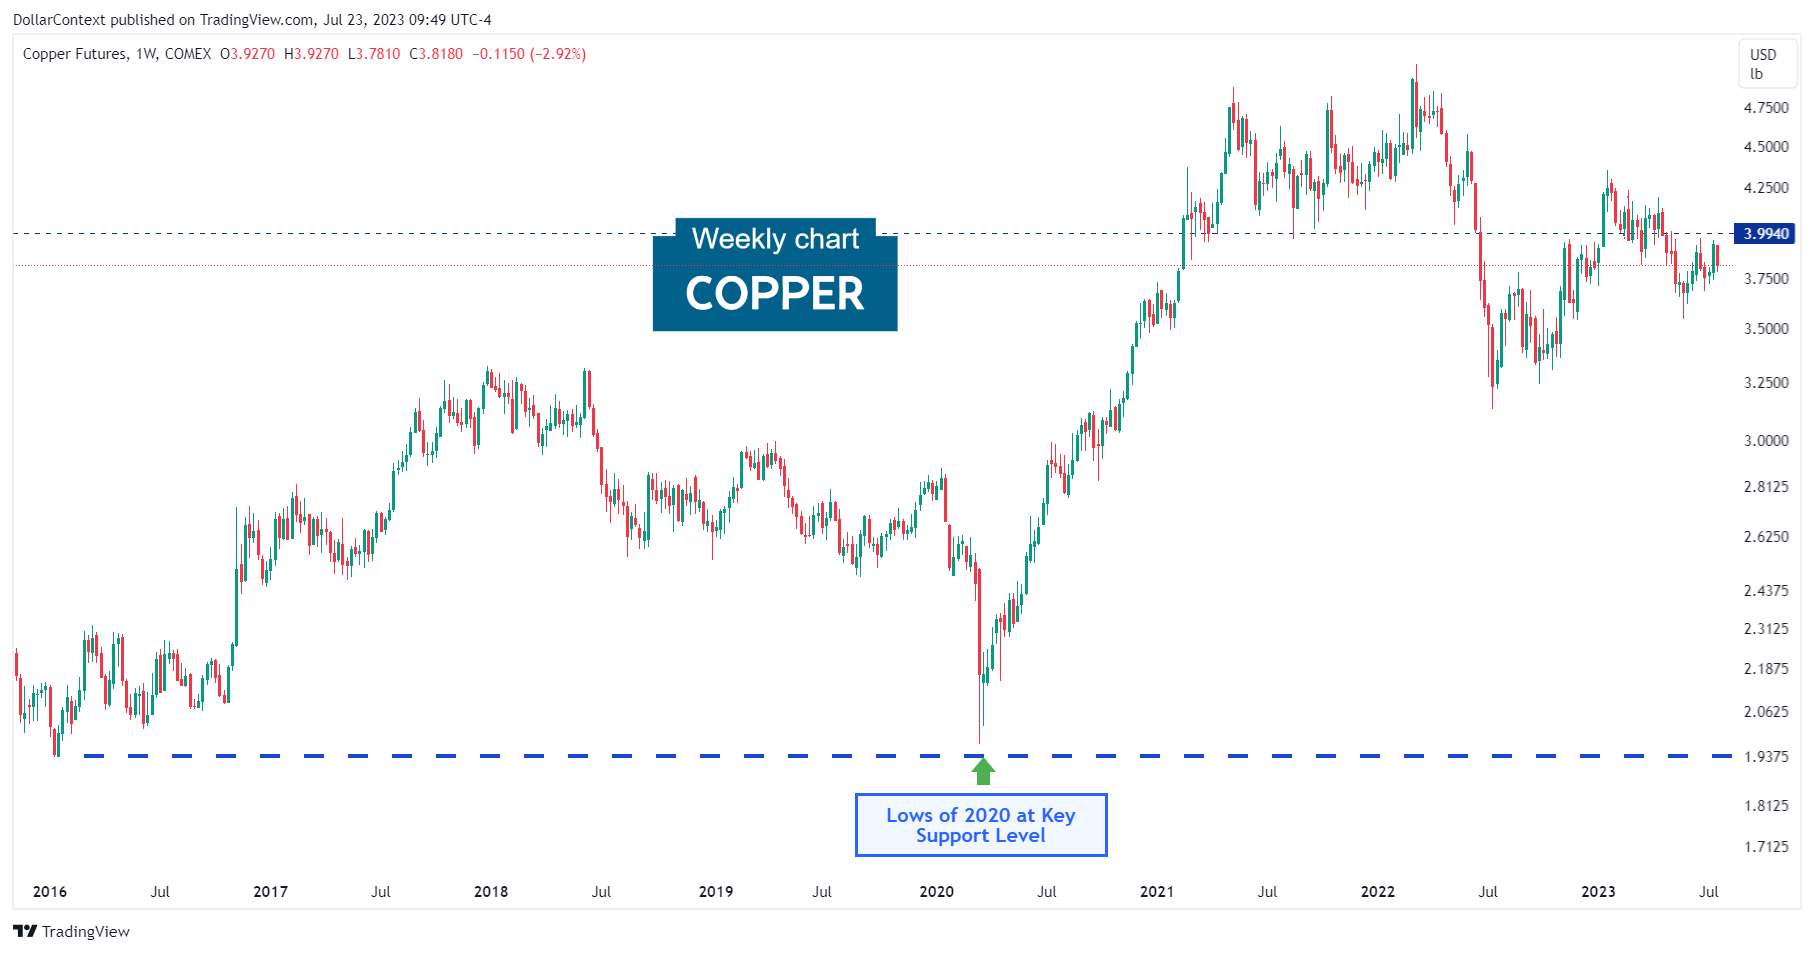 Copper Futures: Lows of the Pandemic